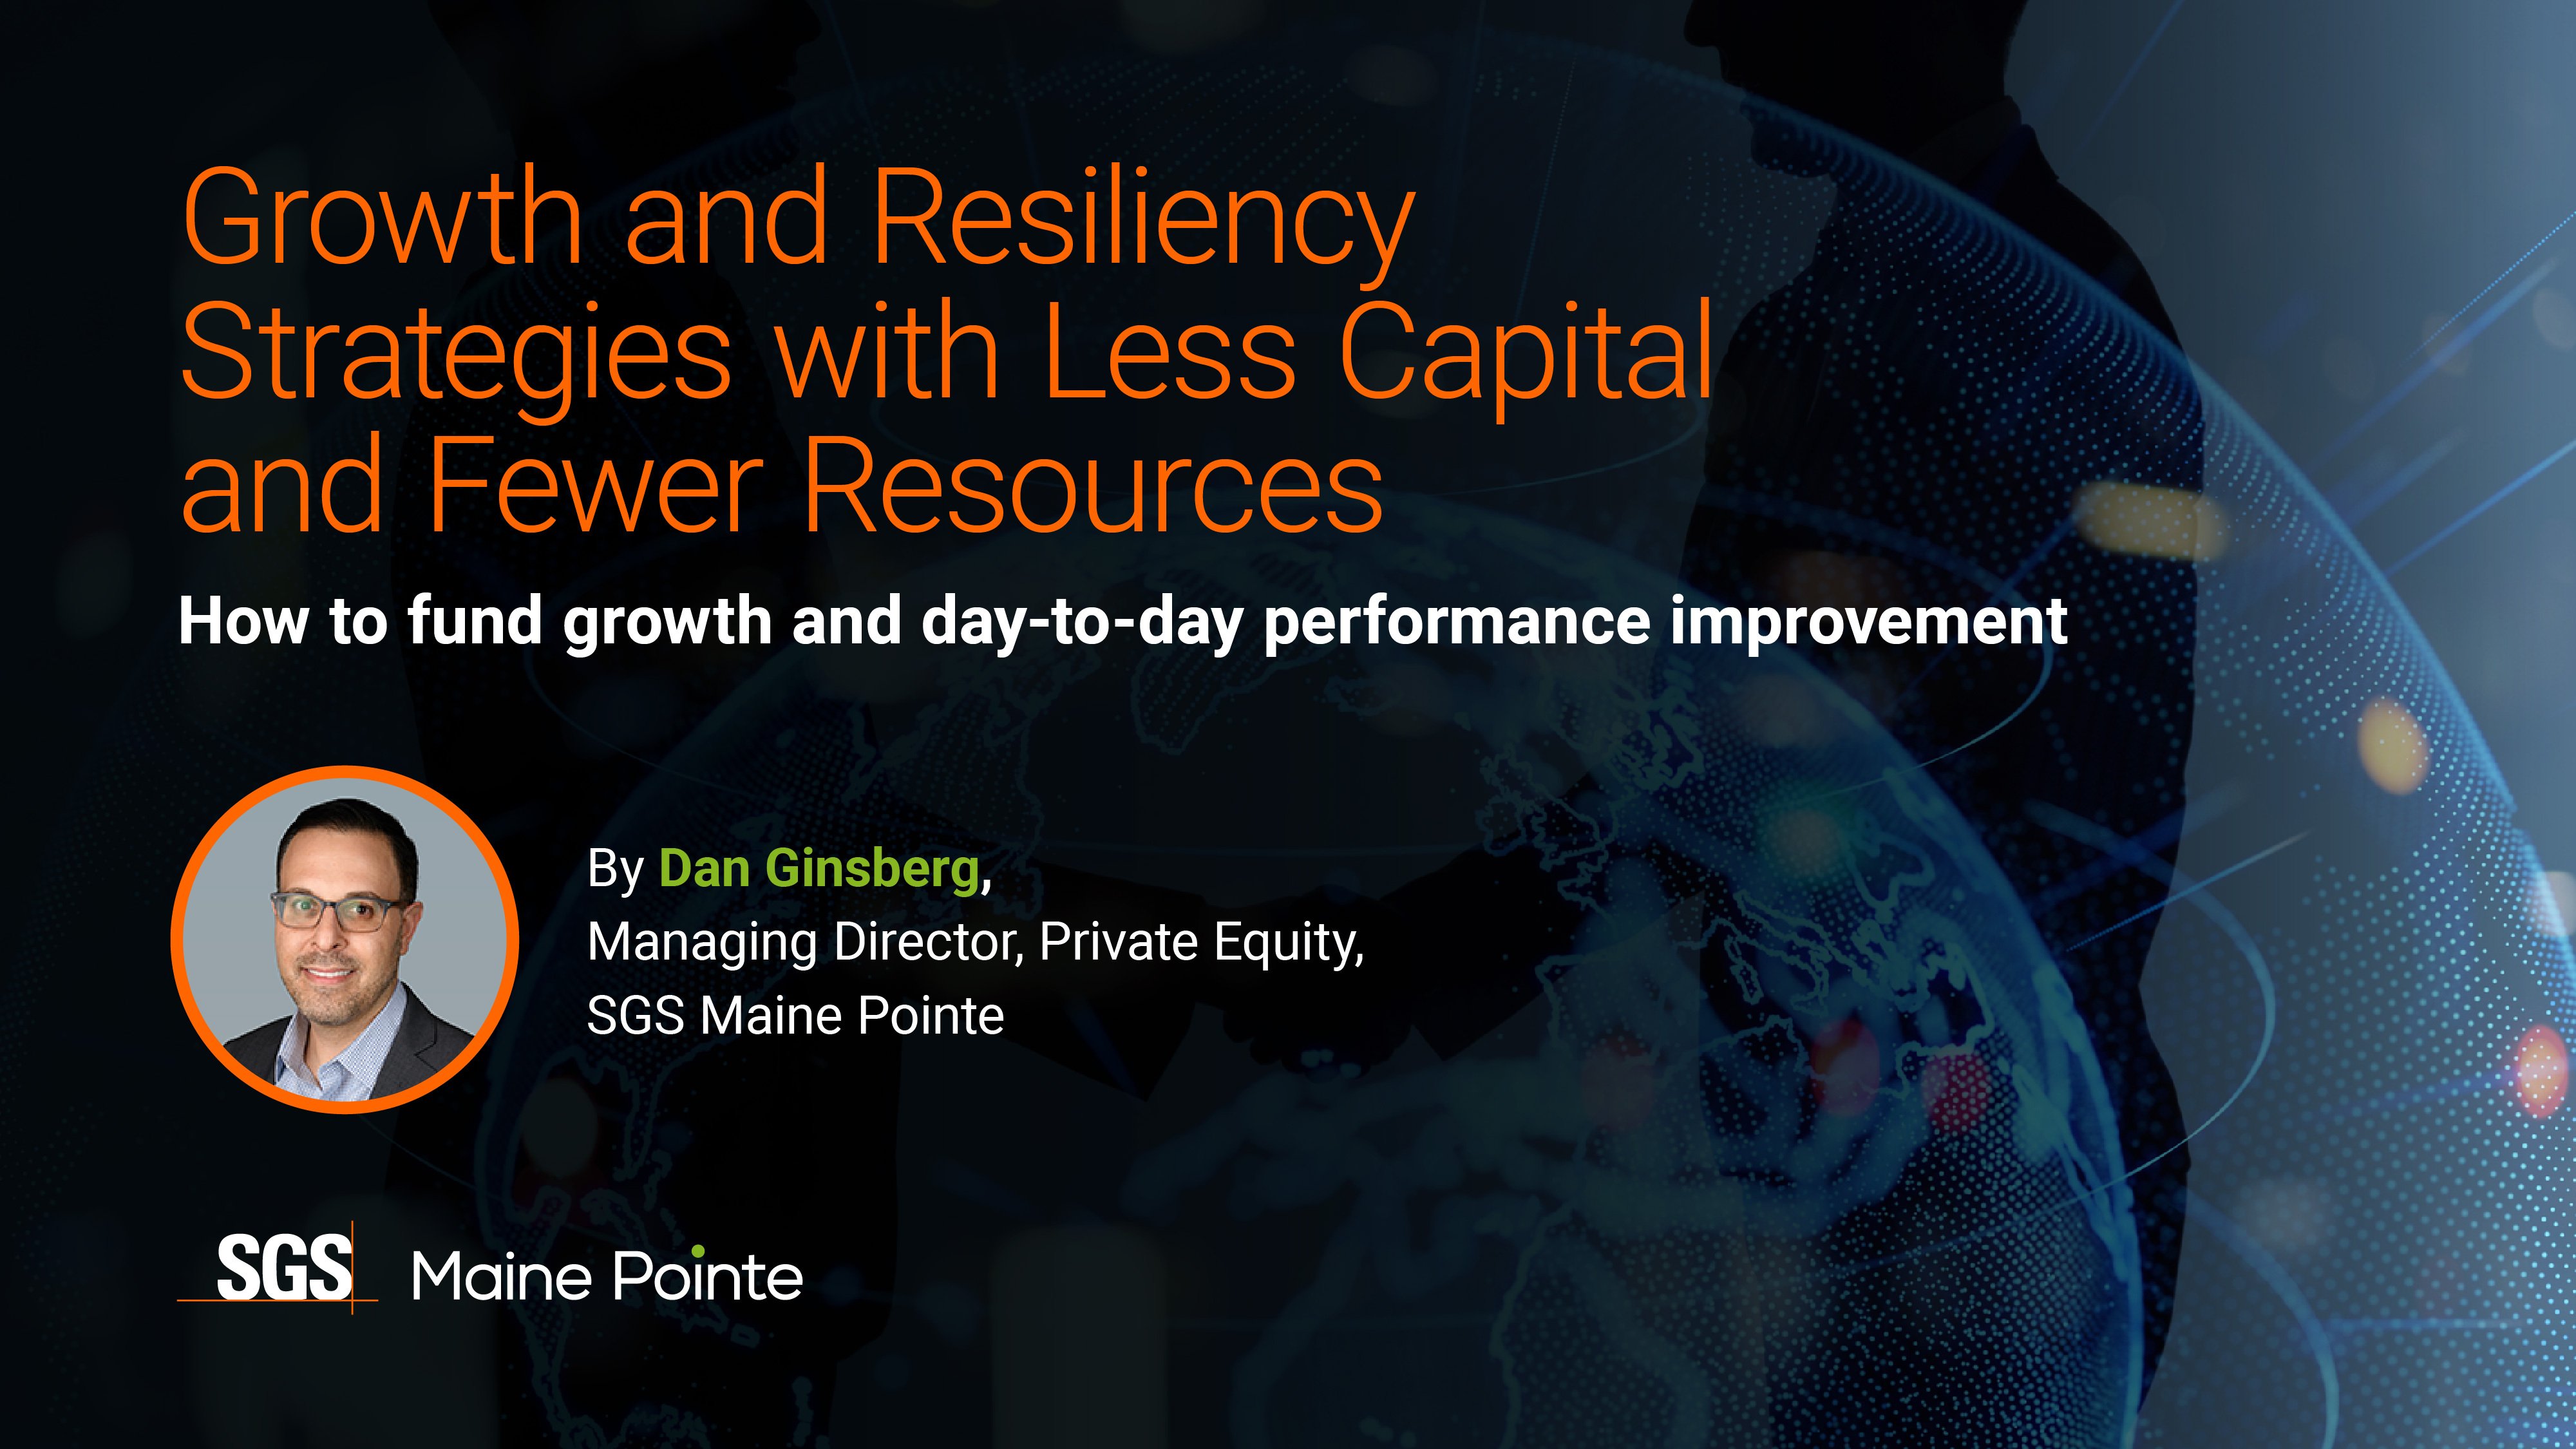 Growth and Resiliency Strategies with Less Capital and Fewer Resources